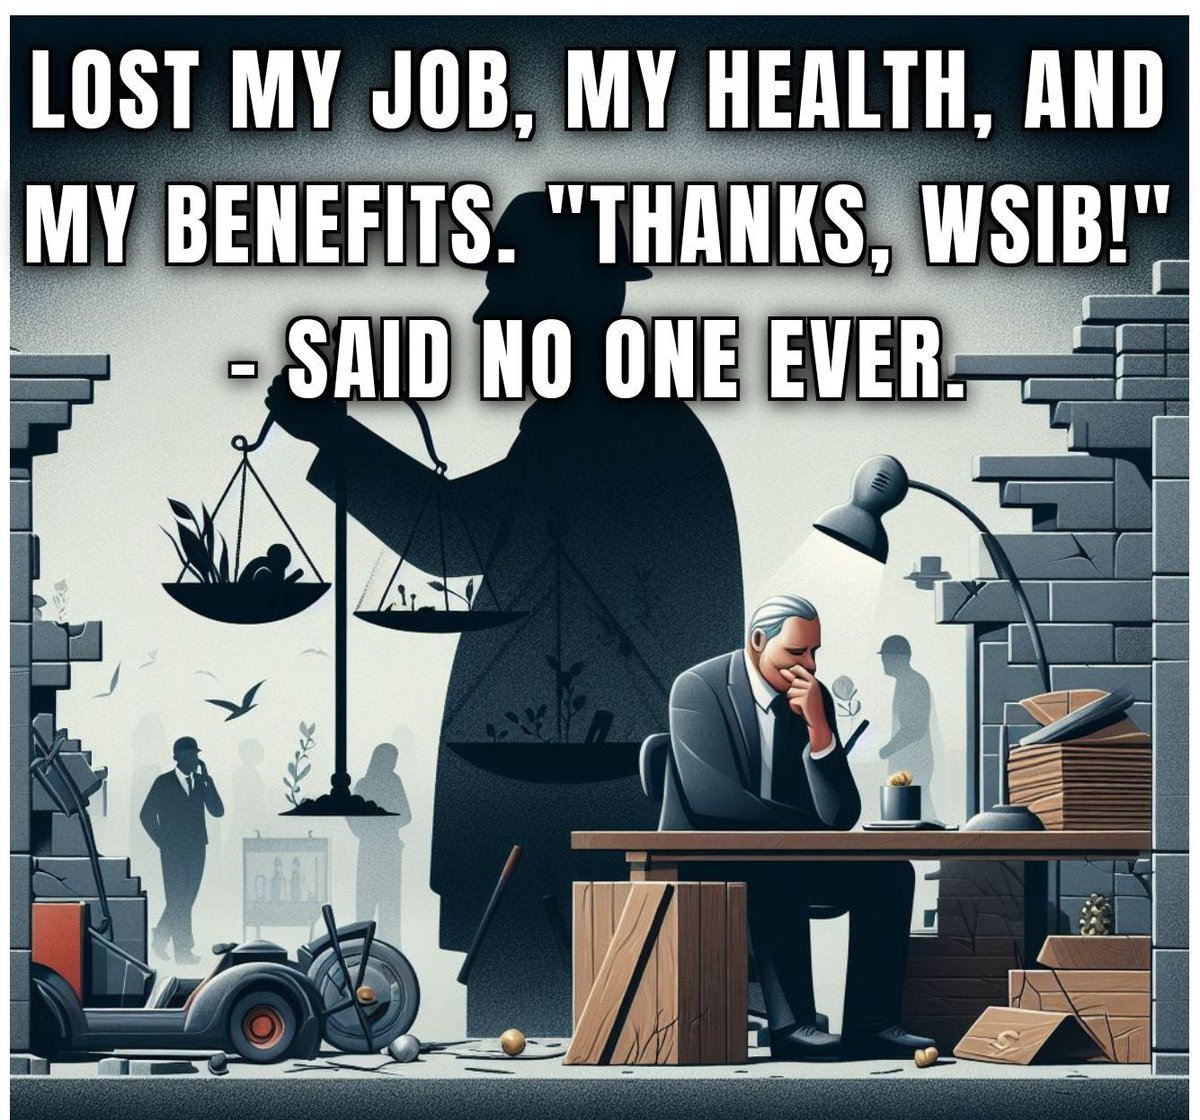 Lost my job, my health, and my benefits. 'Thanks WSIB!' - said no one ever. Injured workers deserve better. It's time for change. #WorkersCompIsARight